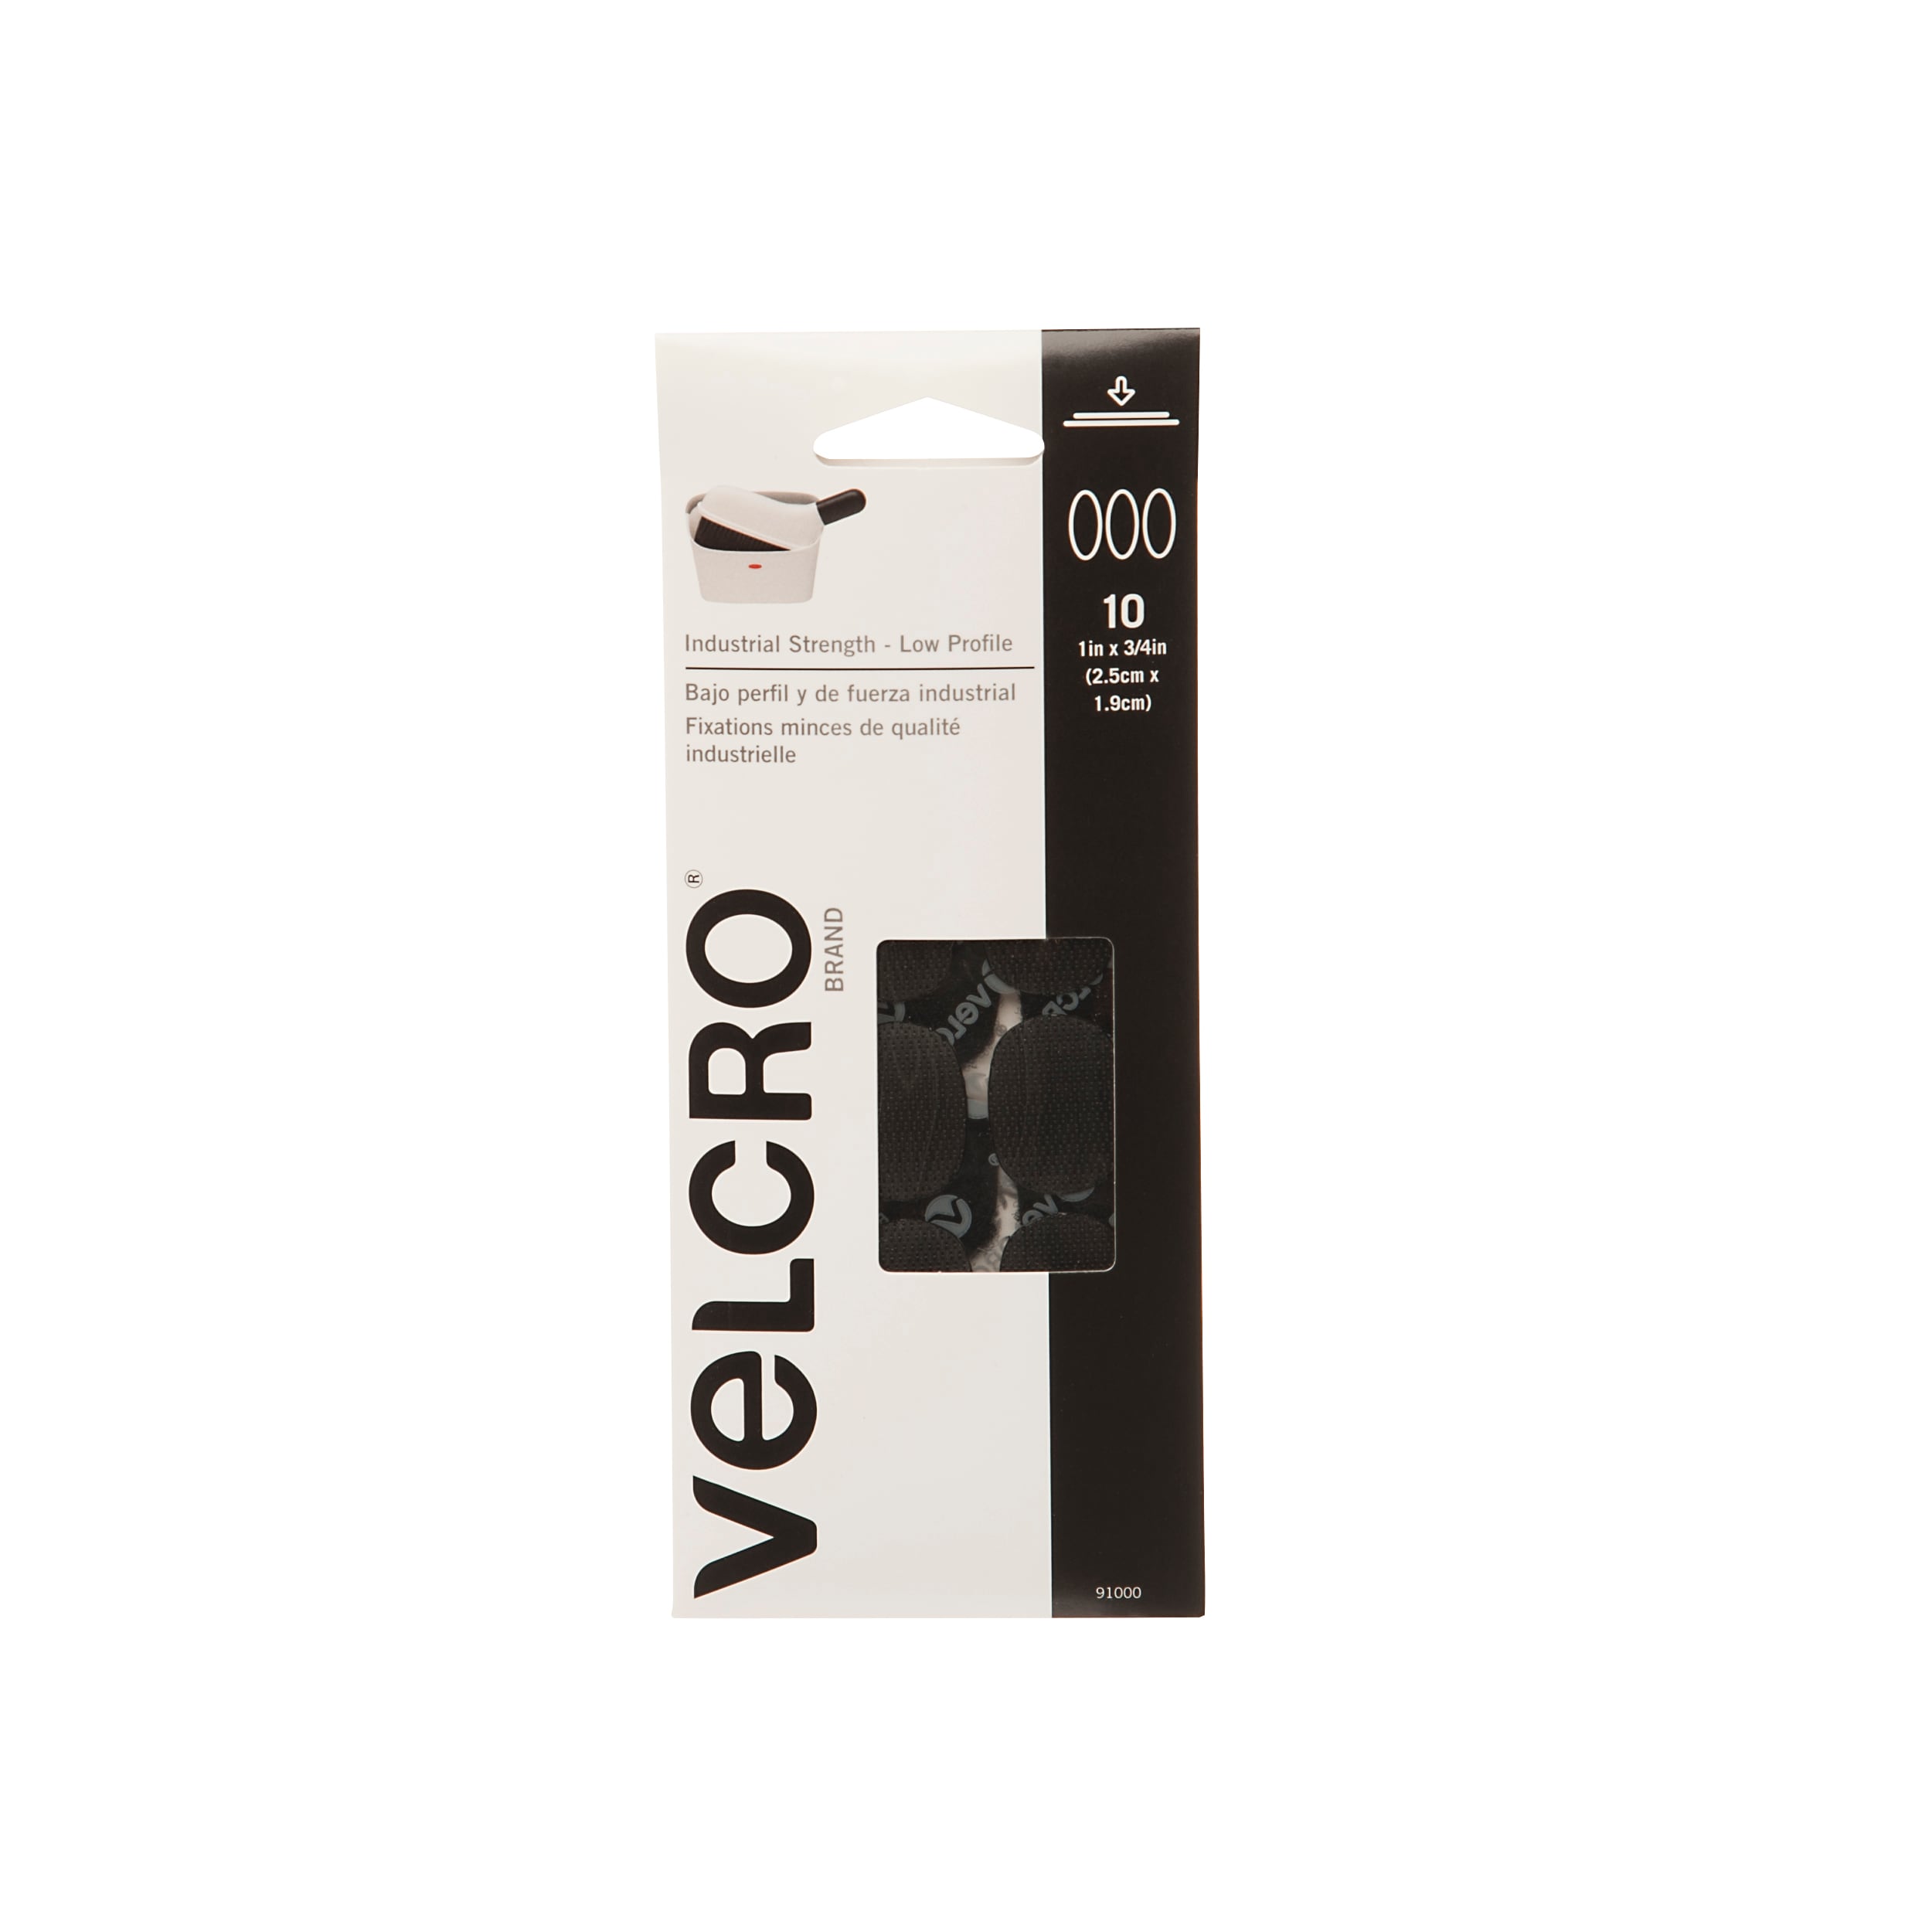 VELCRO 6 in. x 4 in. 1 ct 6/24 Sleek and Thin Stick On Tape White